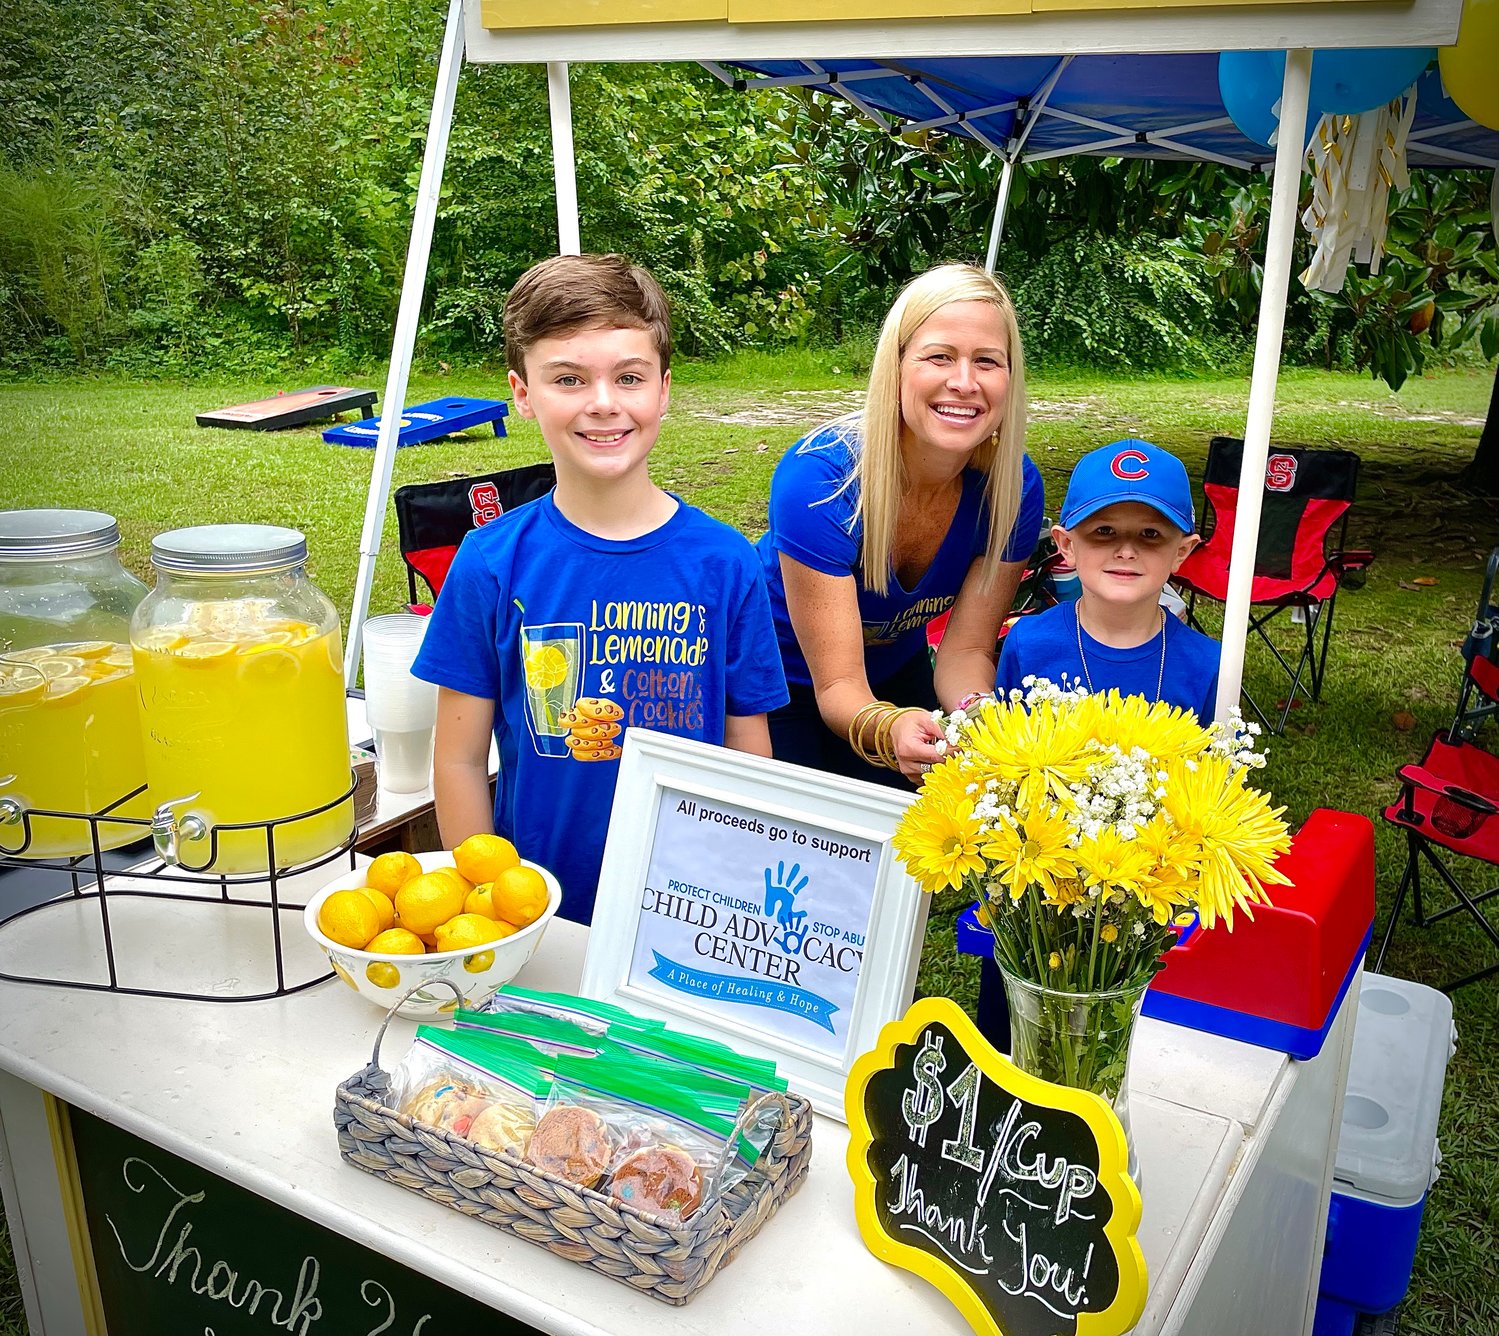 Lanning Kistler, left, Jennifer Walters and Colton Walters. The brothers raised more than $4,500 for the Child Advocacy Center with their Lanning's Lemonade & Colton's Cookies fundraiser on Aug. 20.